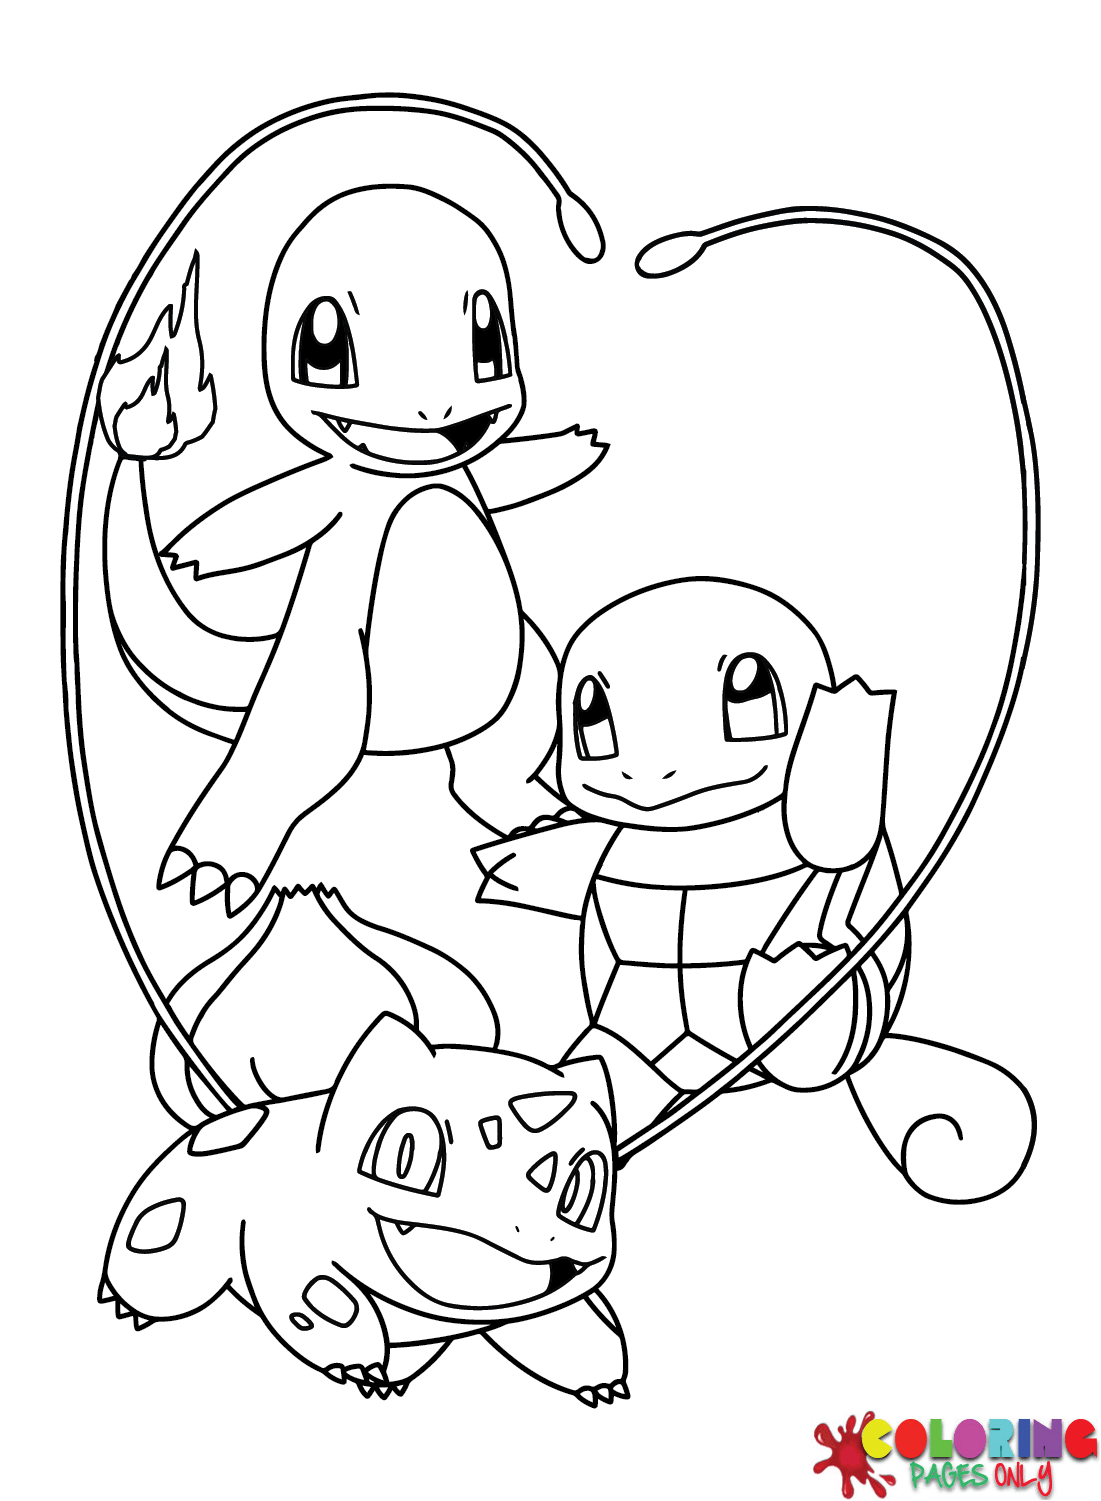 Charizard Images Coloring Pages